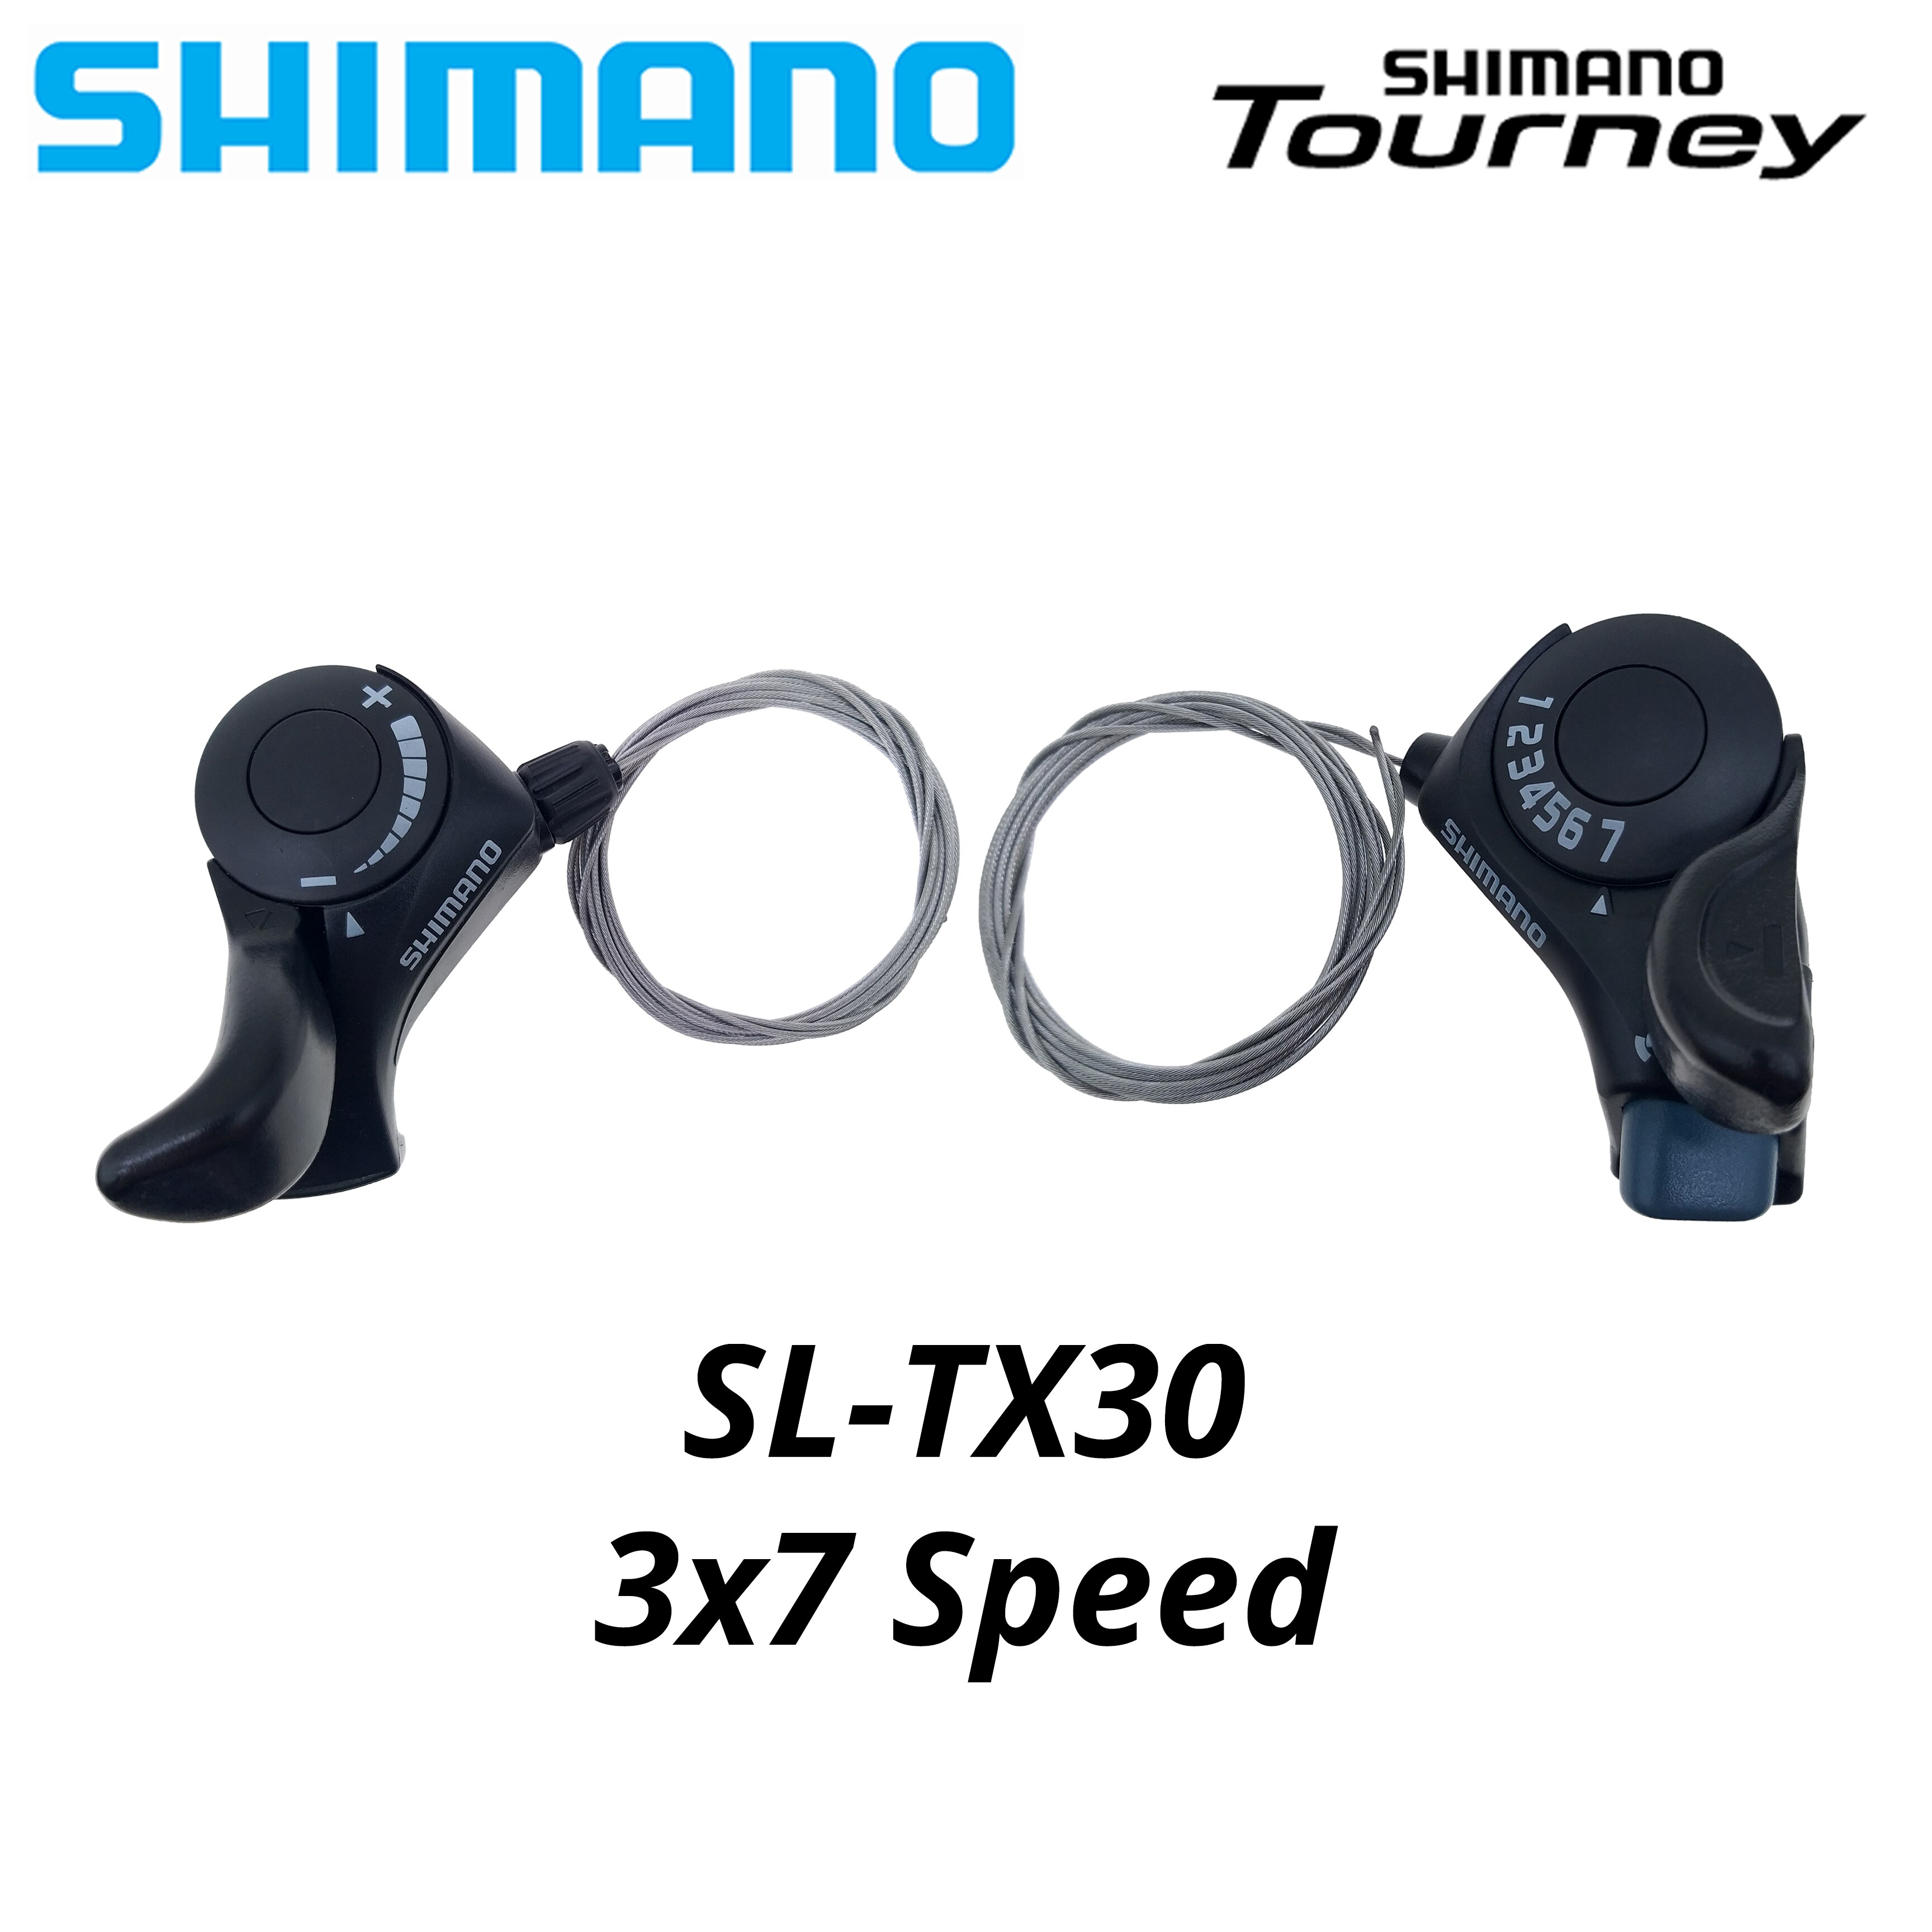 Shimano tourney sl  tx30 cykel gearstang 6 7s 18 21 speed  tx30 shifters indre gearkabel medfølger: Tx30 3 x 7 hastighed